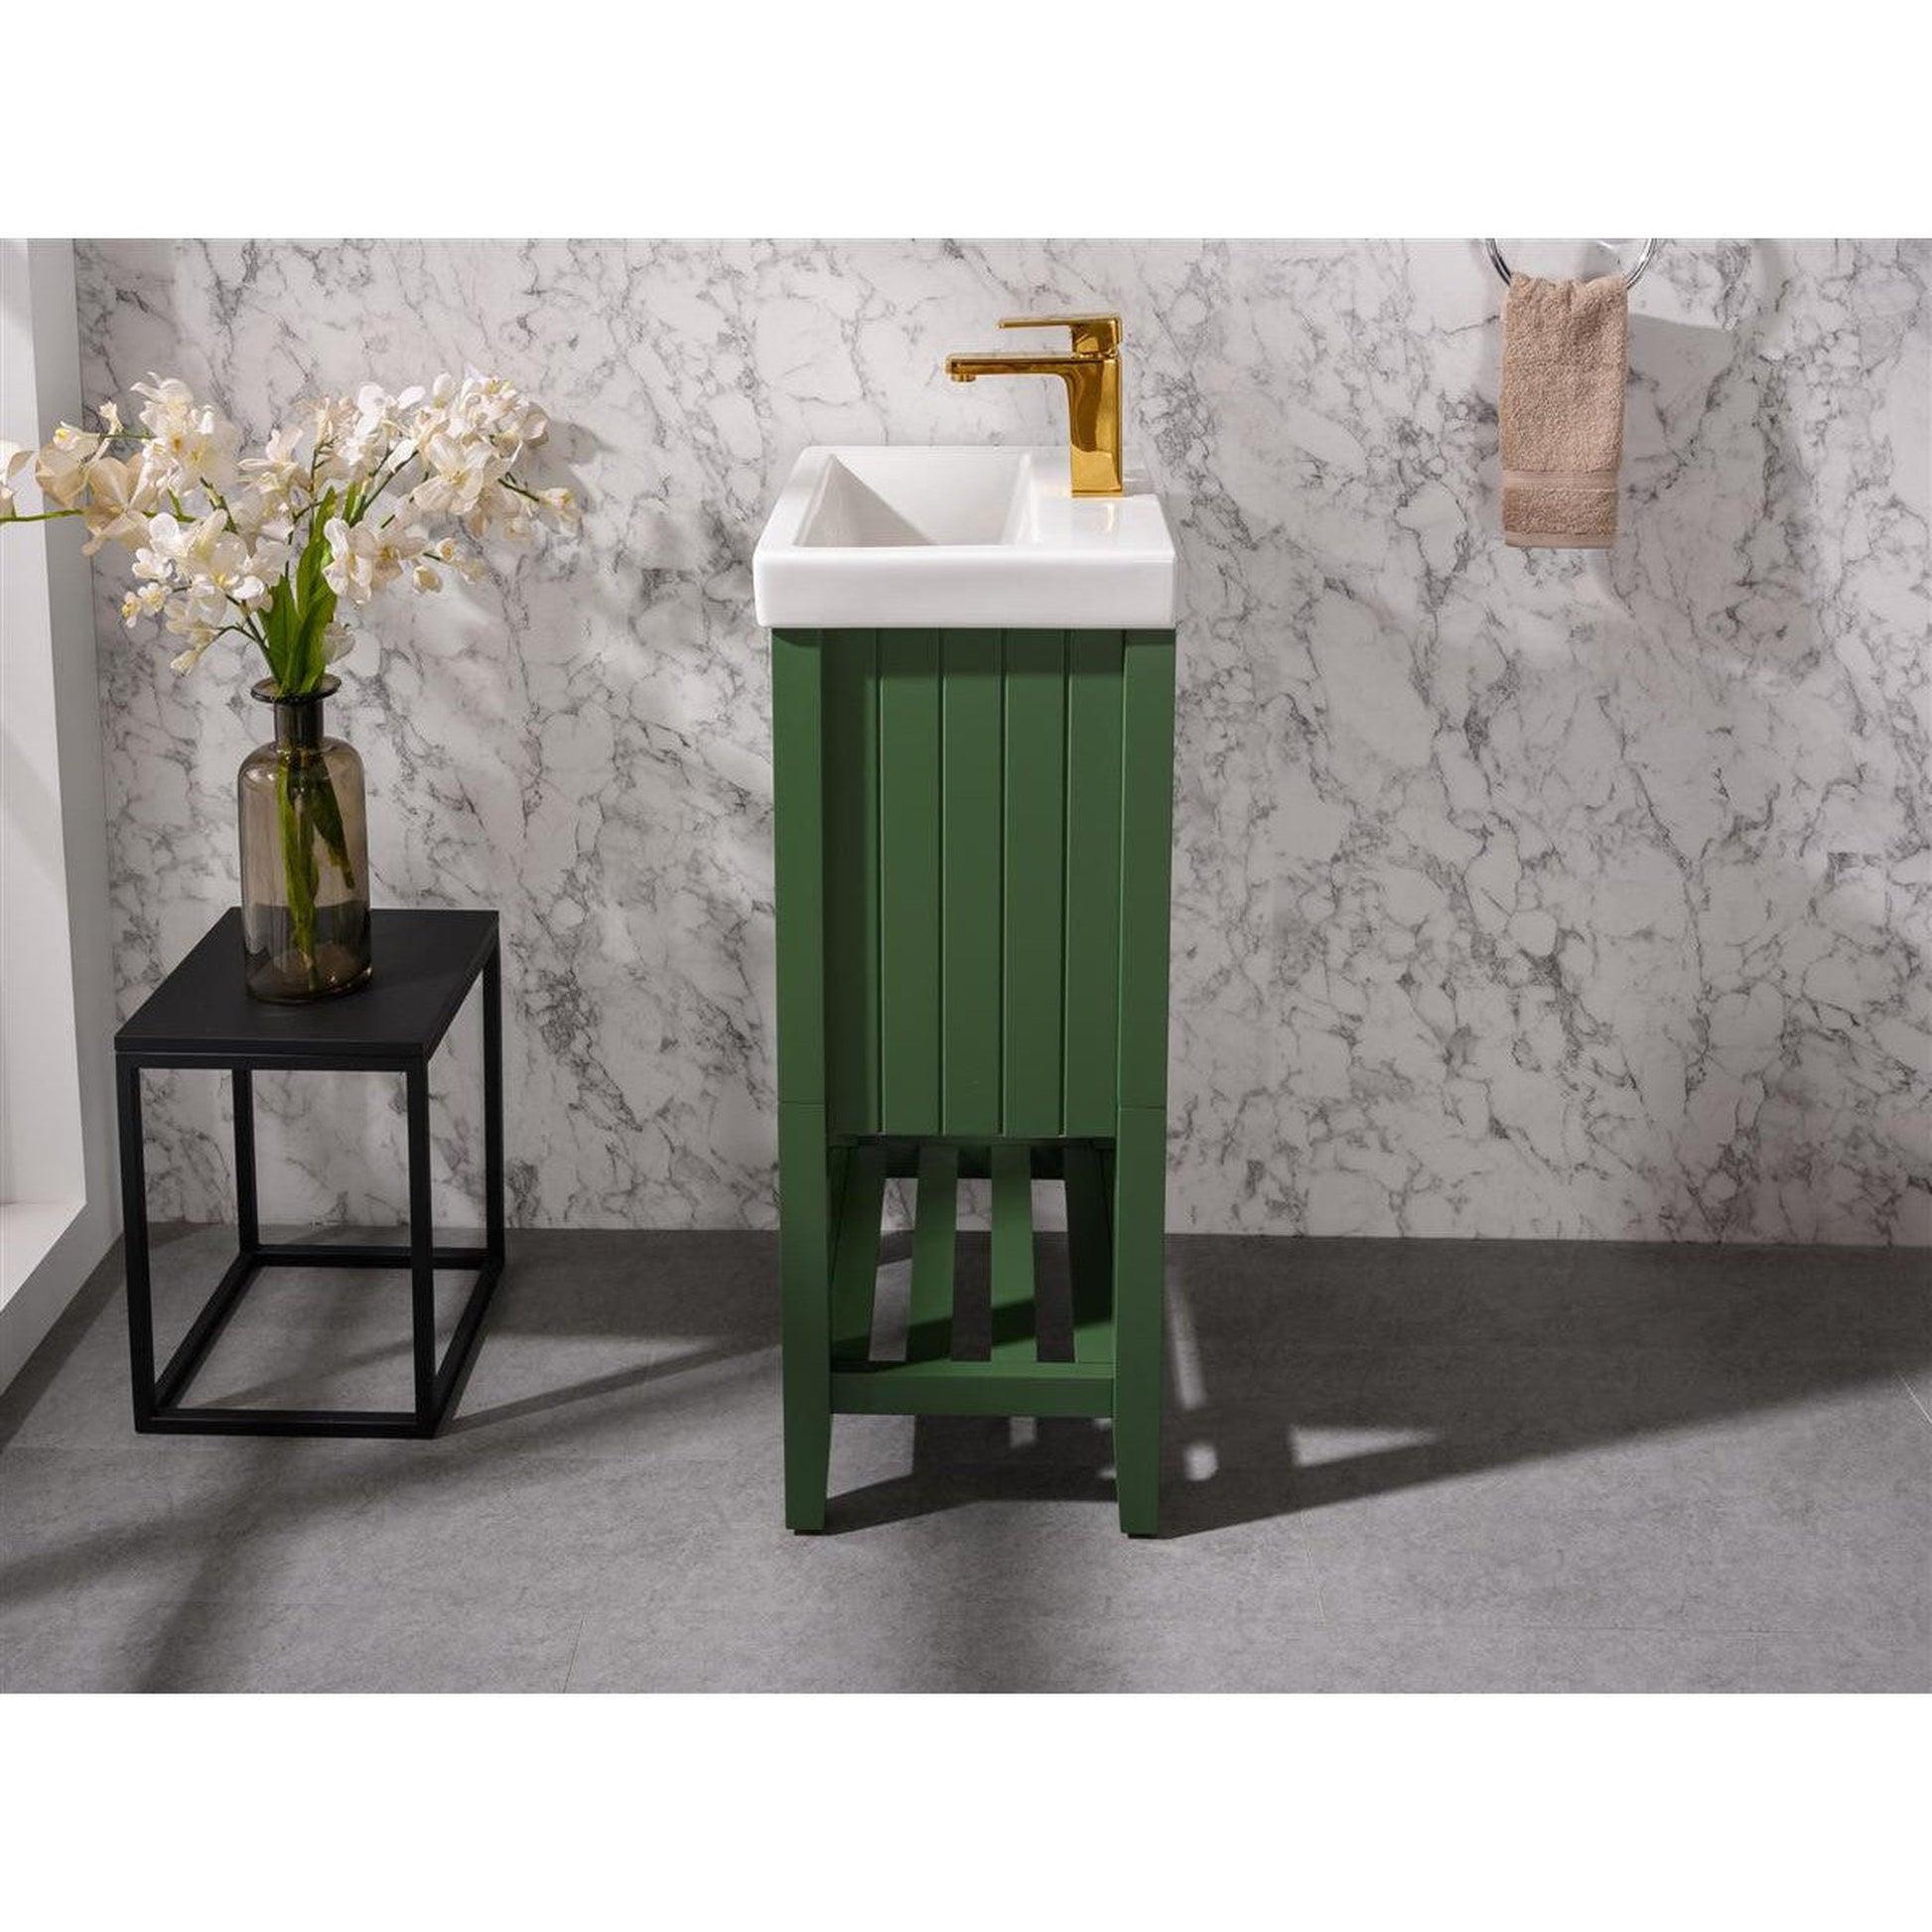 Legion Furniture WLF9018 18" Vogue Green Freestanding Vanity Cabinet With White Ceramic Top and Sink